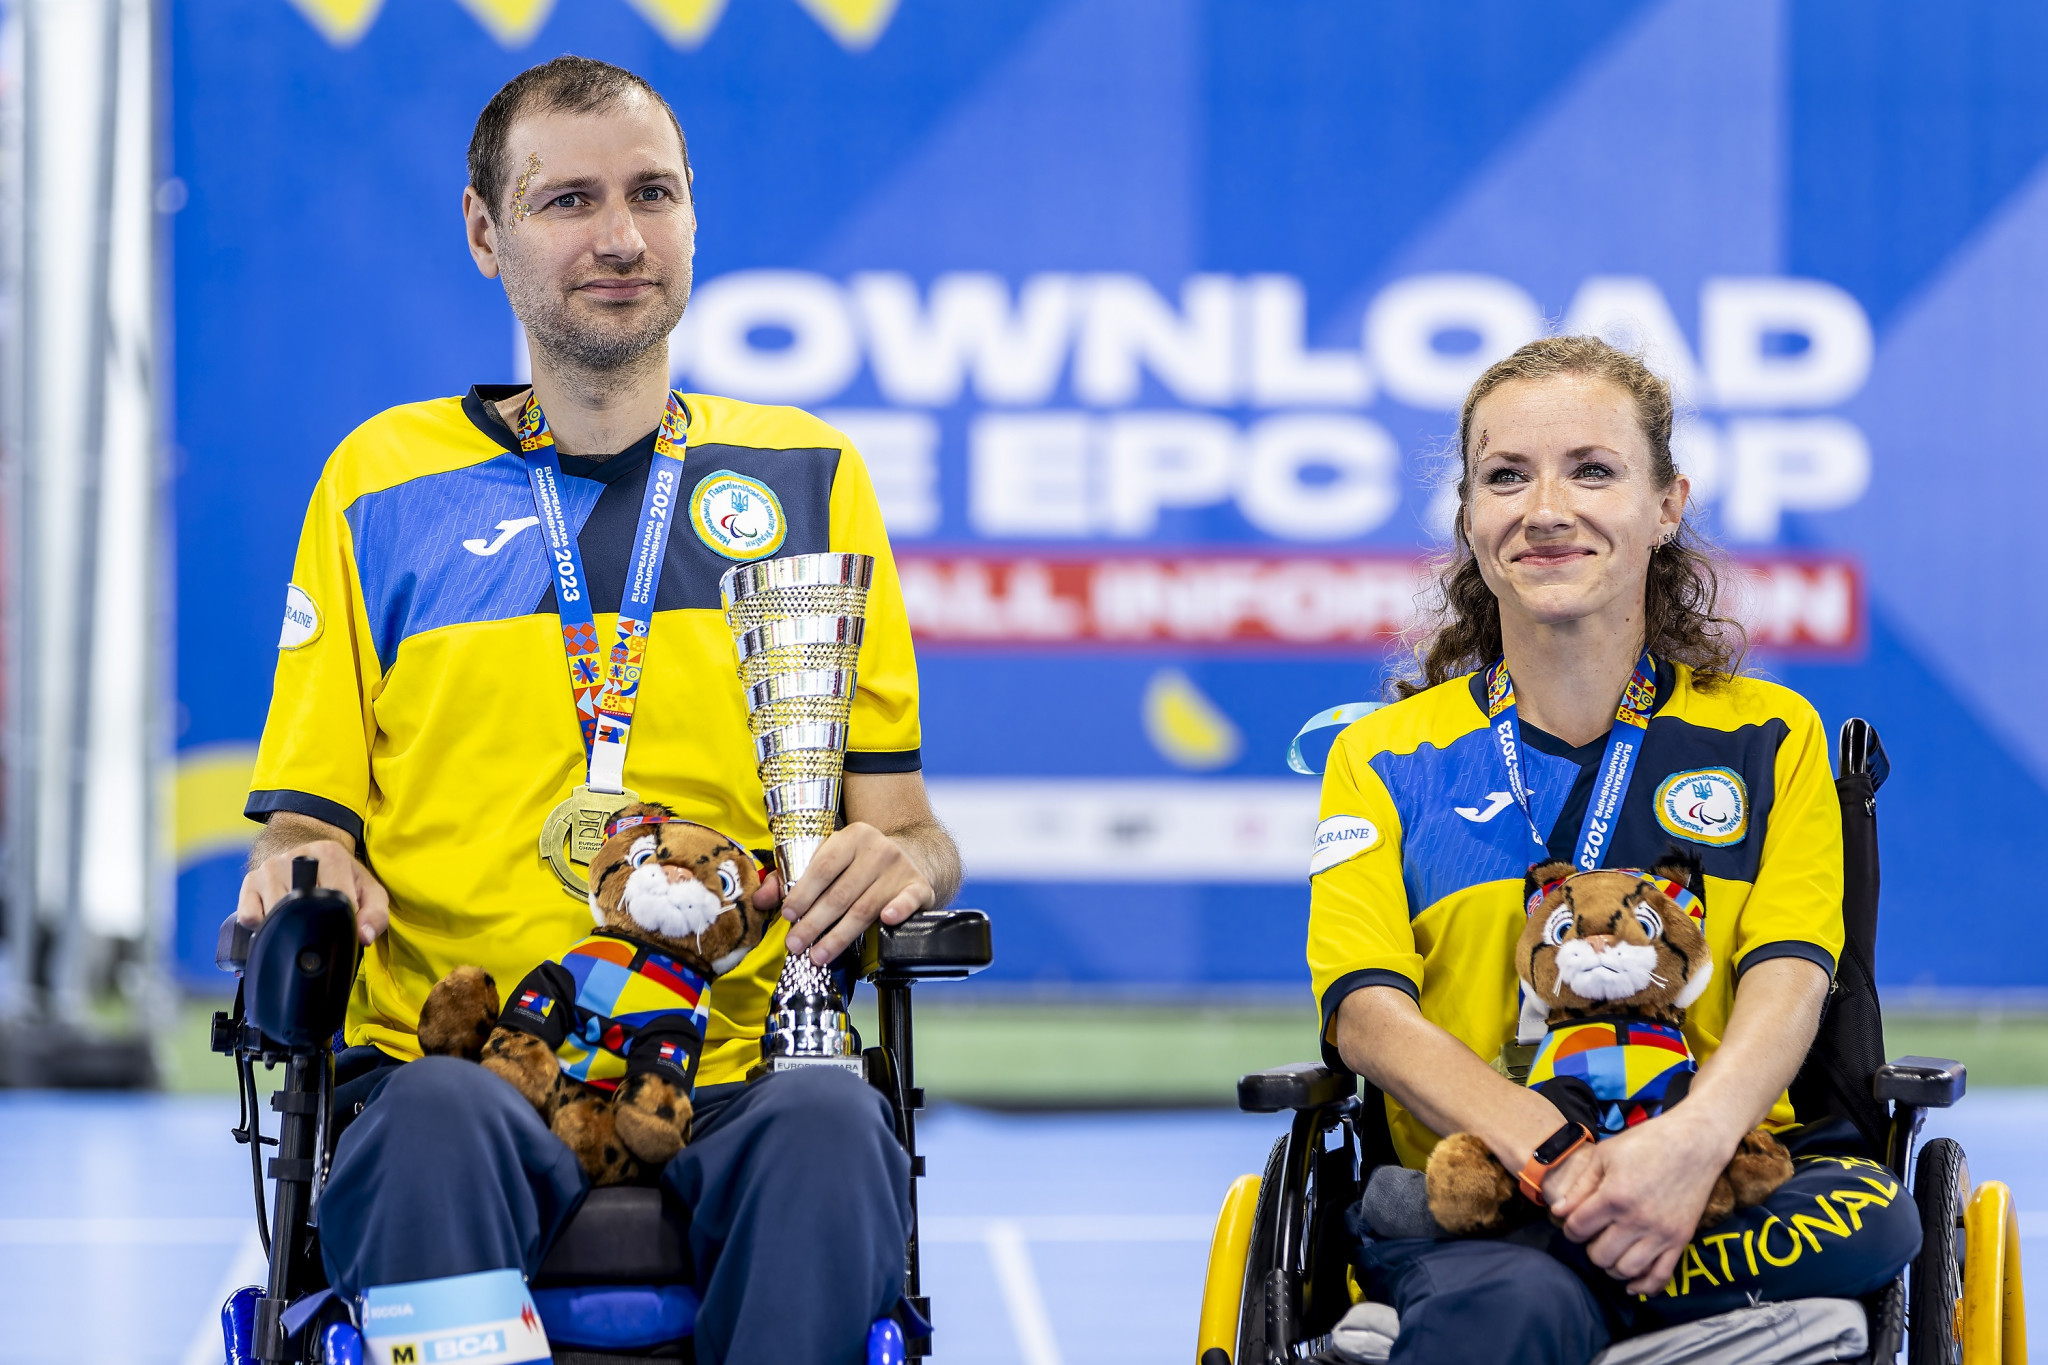 Ukraine defeated Britain 3-1 to win the BC4 pairs title ©EPC